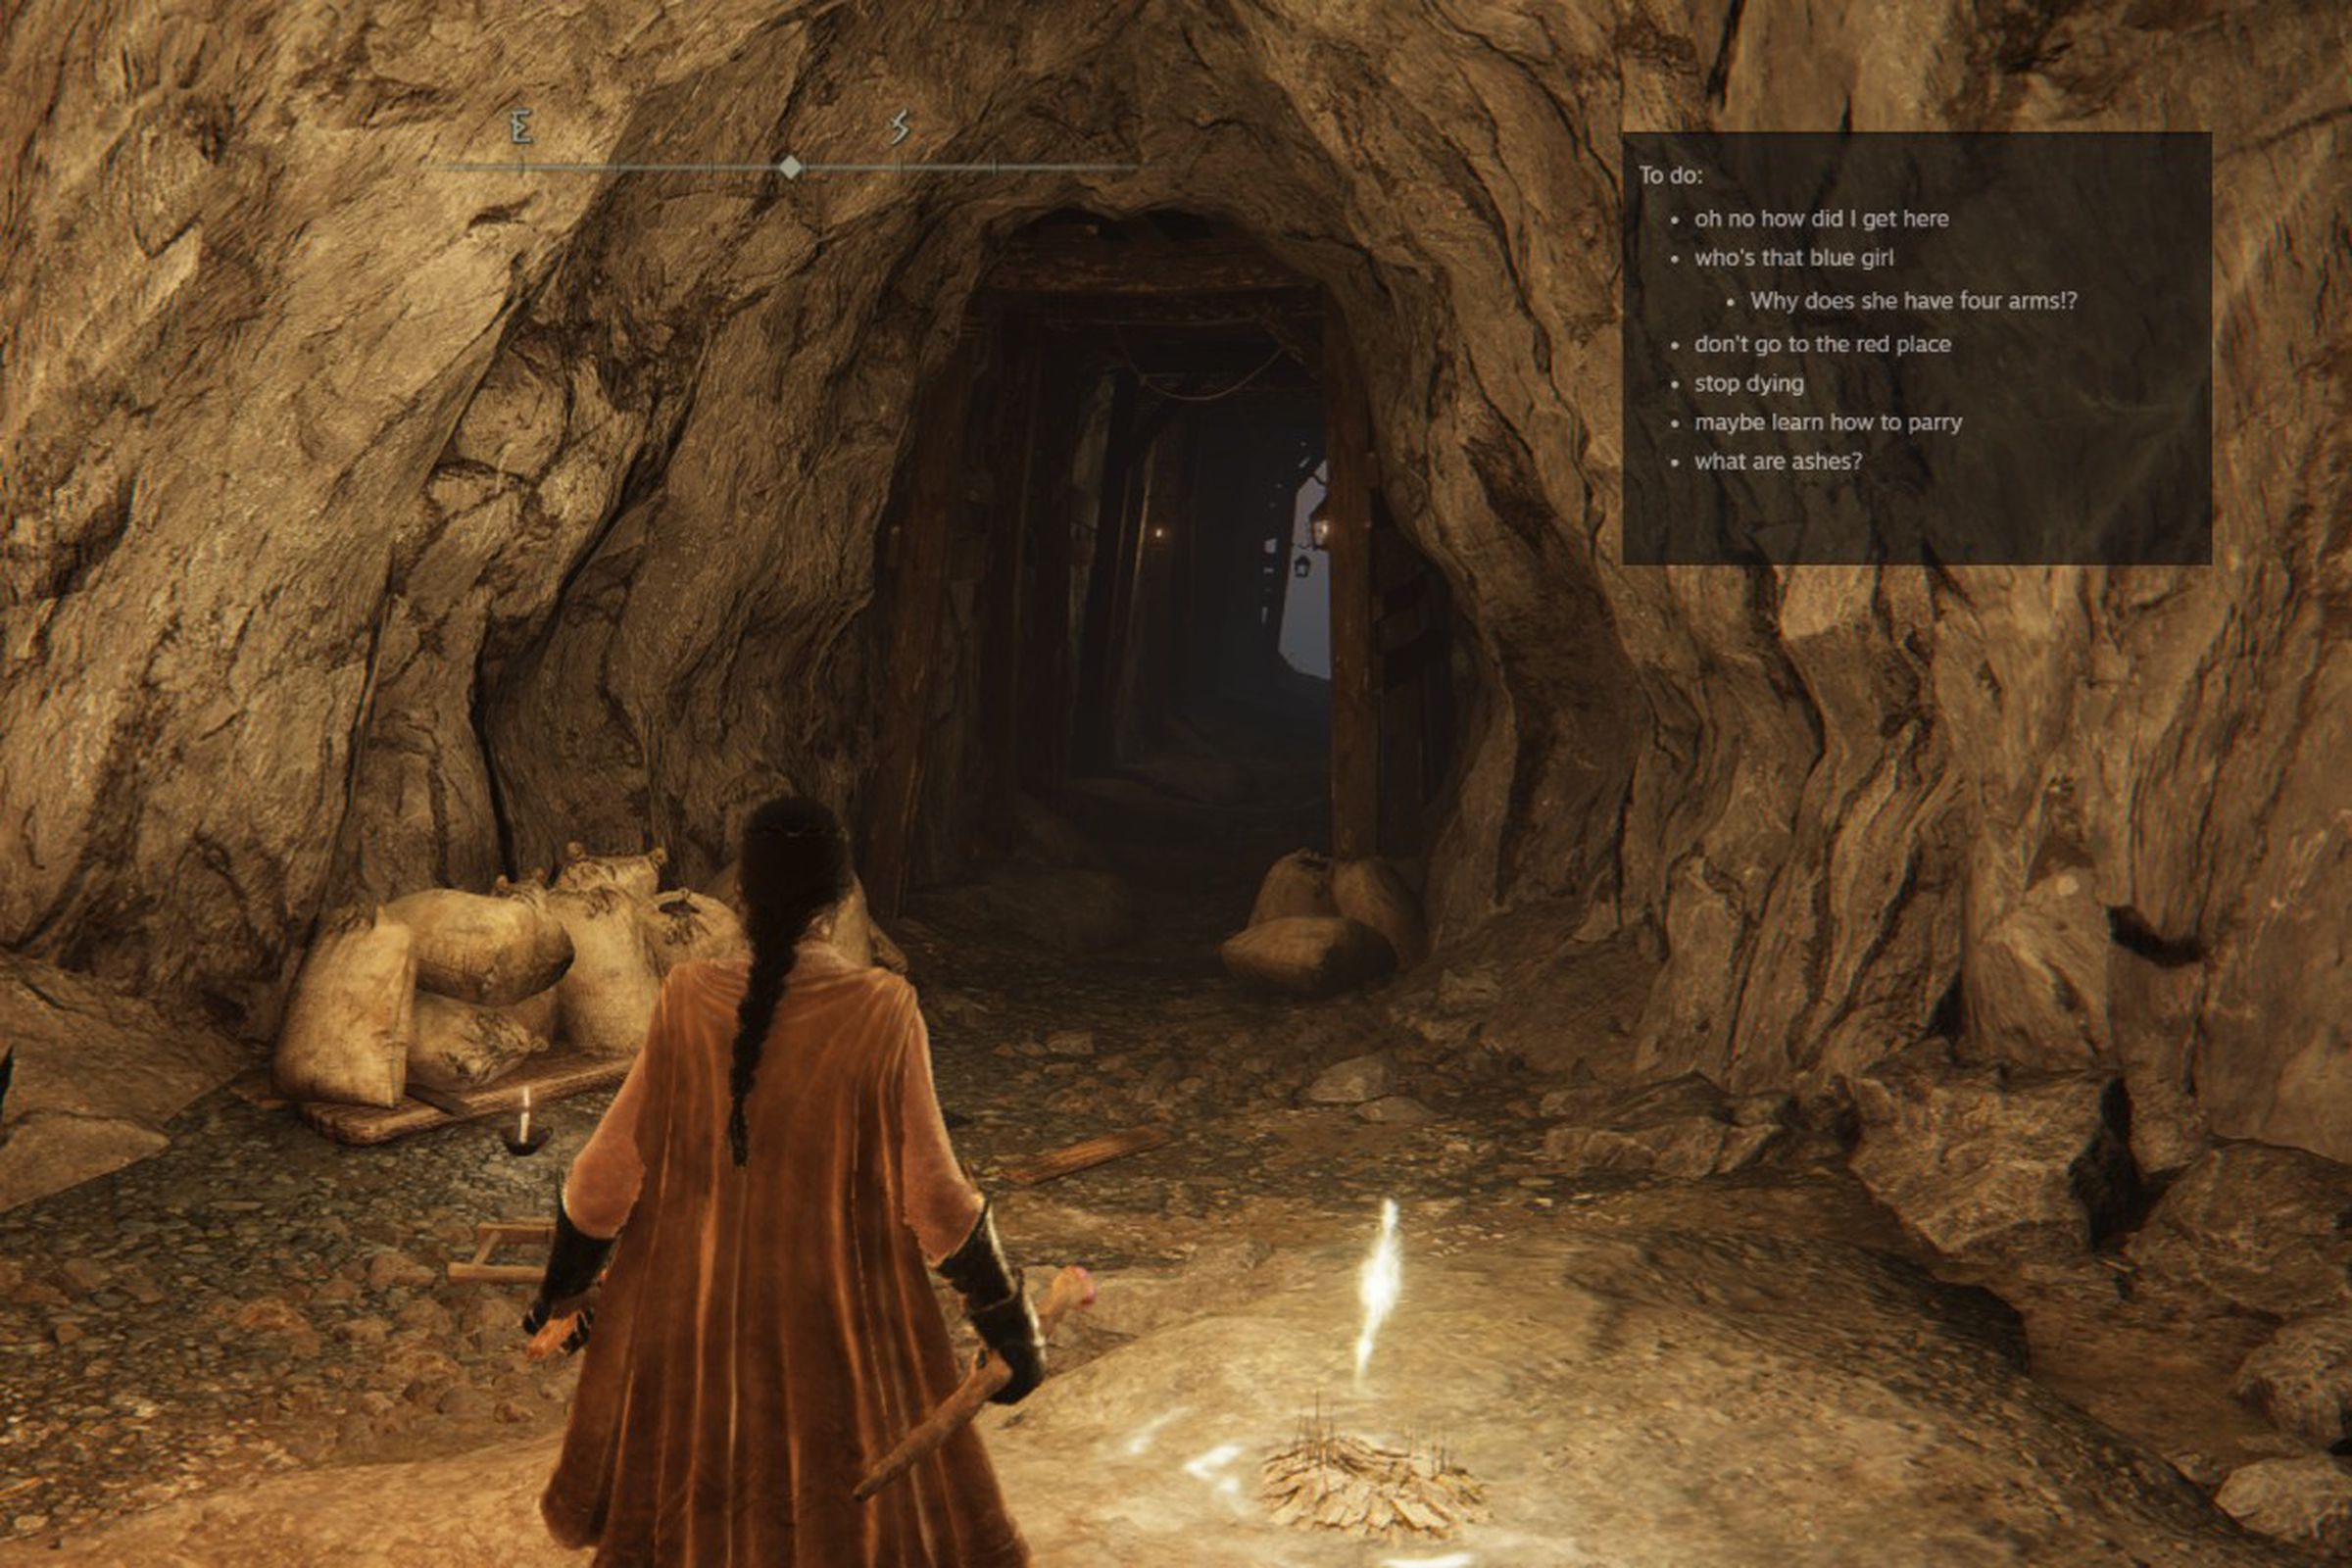 a scene from the game elden ring, near a lit firepit, in a cavern, with a floating transparent notepad contents joking about who a blue girl is and why she has four arms and maybe stop dying and learn to parry. 